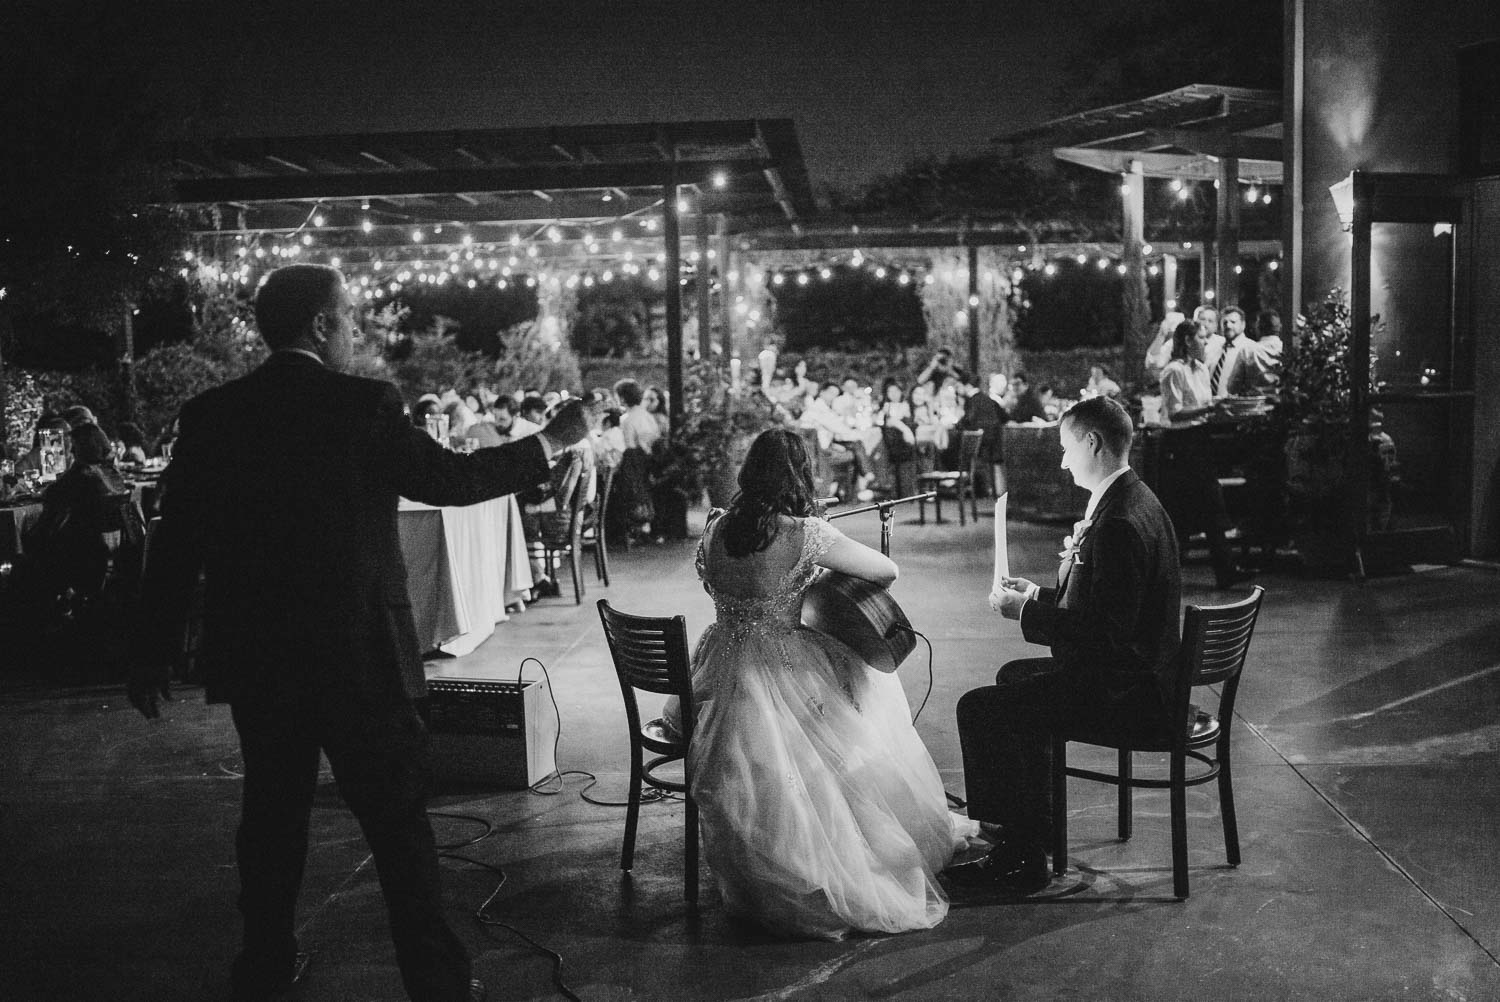 The bride sings a song with guitar to groom at Paesanos 1604 Wedding Reception-Philip Thomas